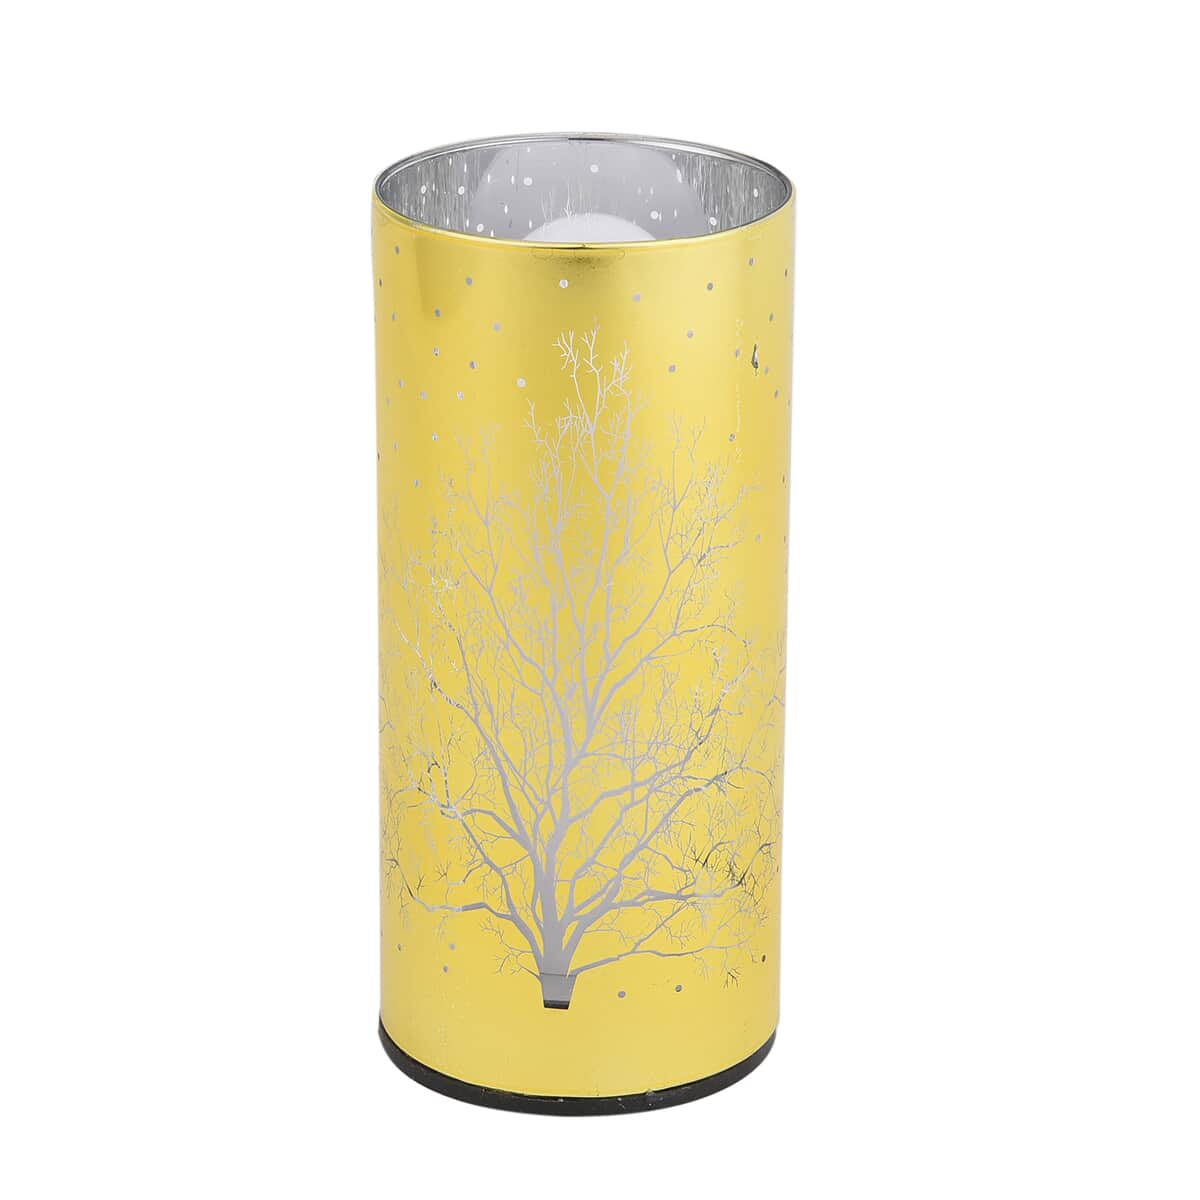 Set of 2 Golden & Silver Hollow-Out Tree Pattern Flame Led Lantern For Christmas Decorations, Festive Lanterns LED Light For Tabletop Home Desk Decor (3xAAA Batteries Not Included) image number 2